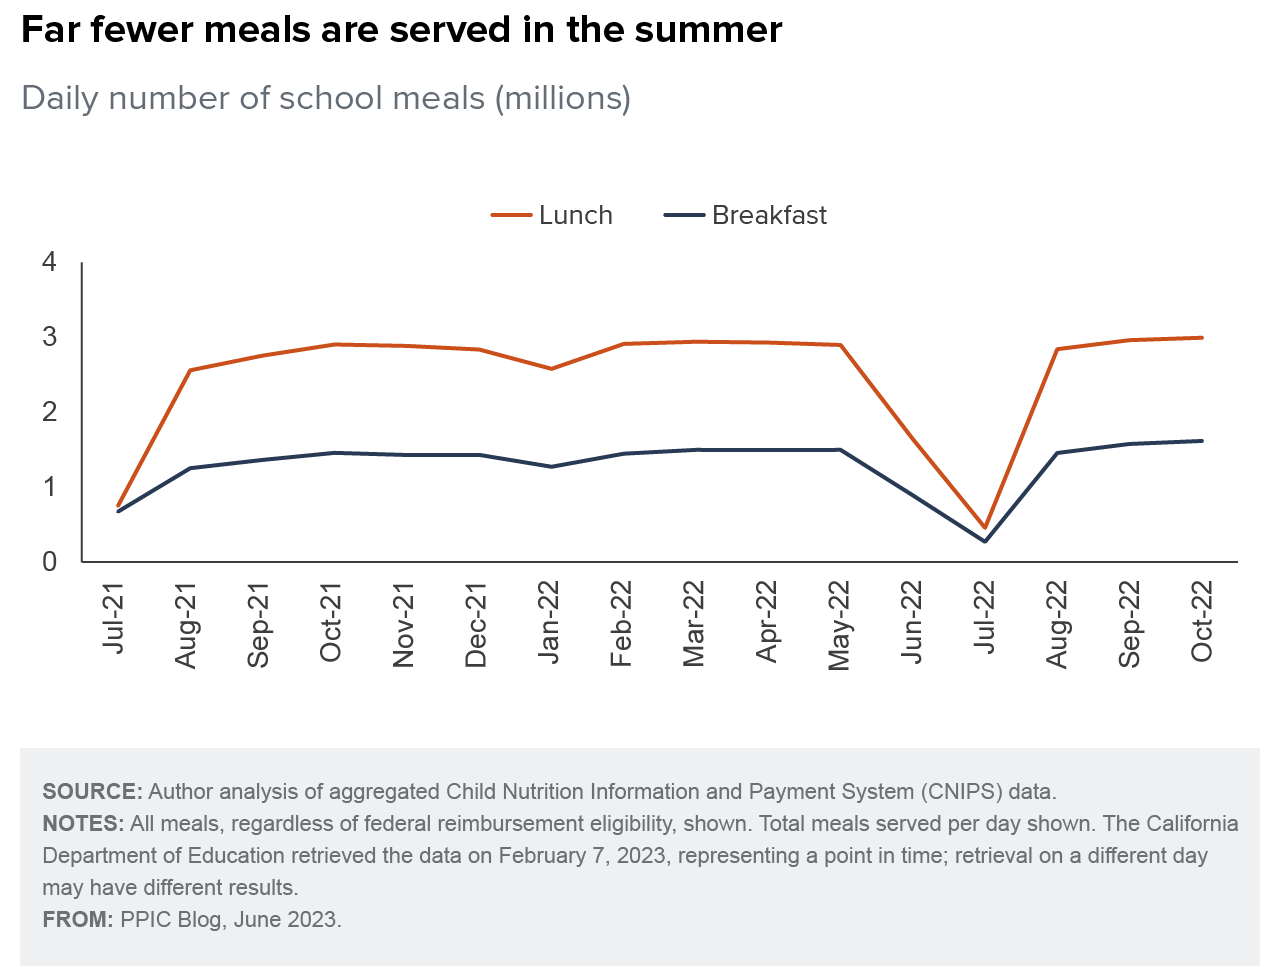 figure - Far fewer meals are served in the summer